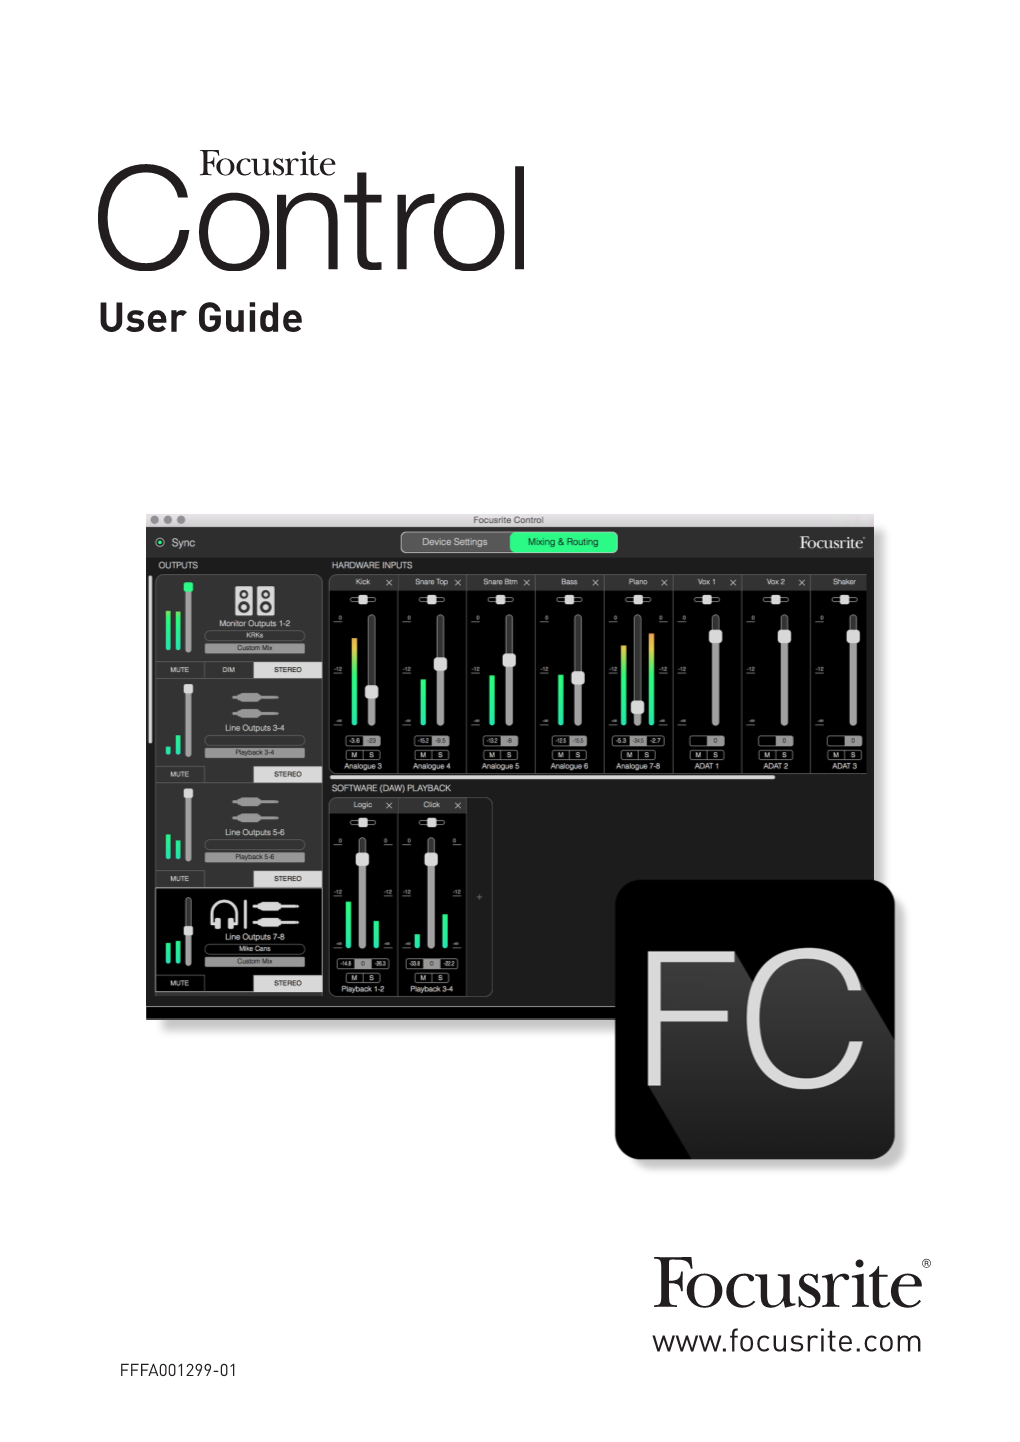 Focusrite Control, the Software Application That Has Been Developed Specifically for Use with the Focusrite Clarett Range of Thunderbolt™ Audio Interfaces